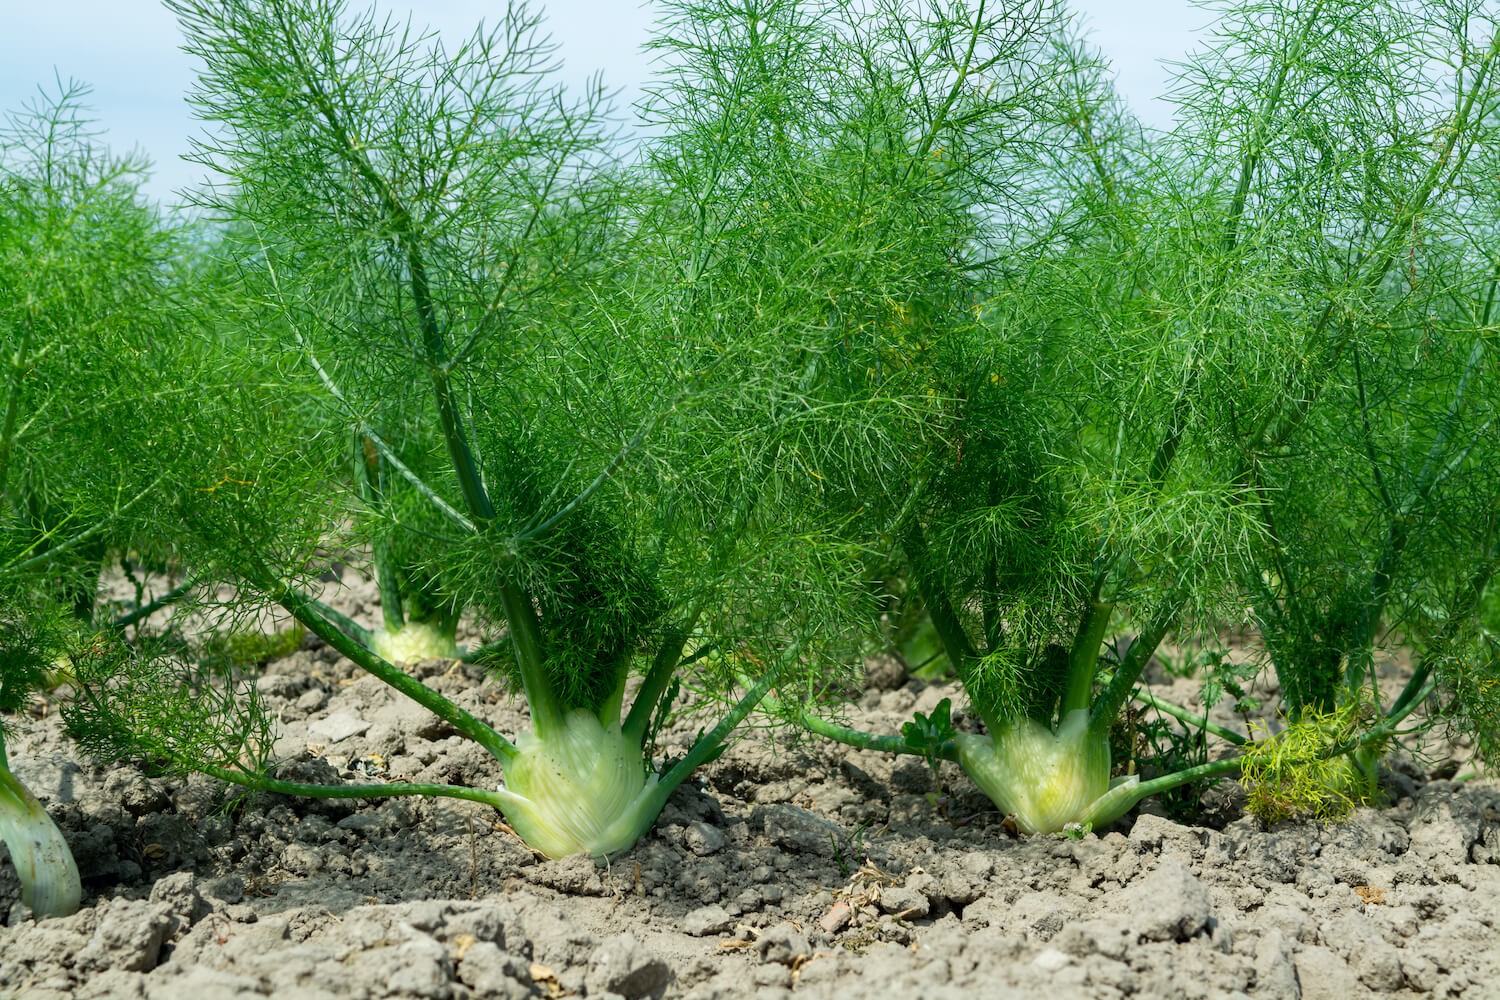 Image of Fennel and lettuce plants